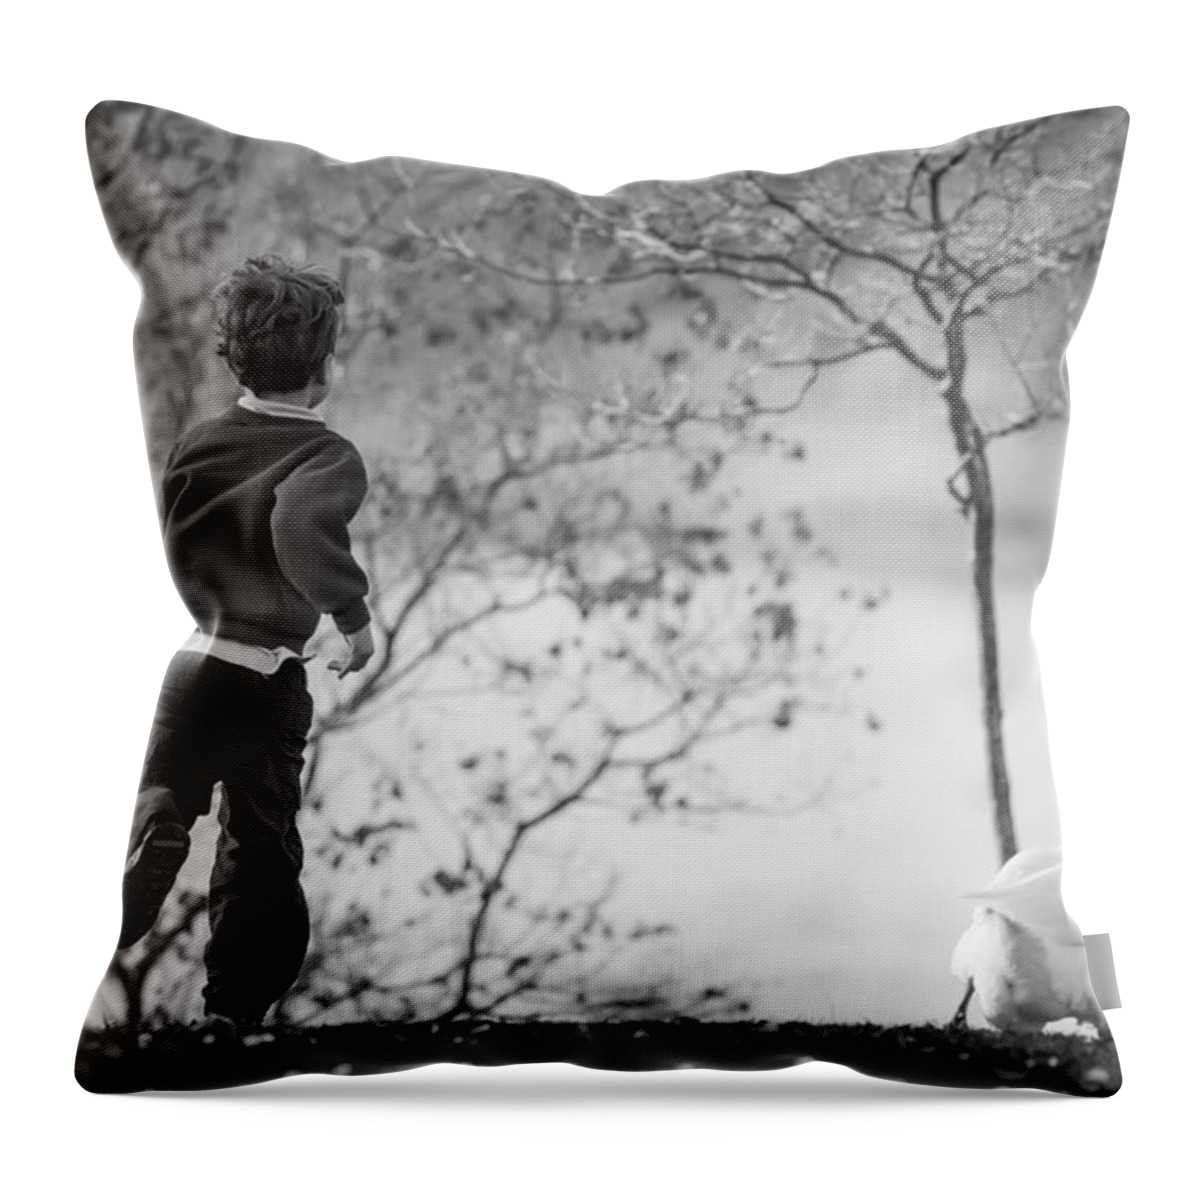 Goose Chase Throw Pillow featuring the photograph The Goose Chase by Priya Ghose